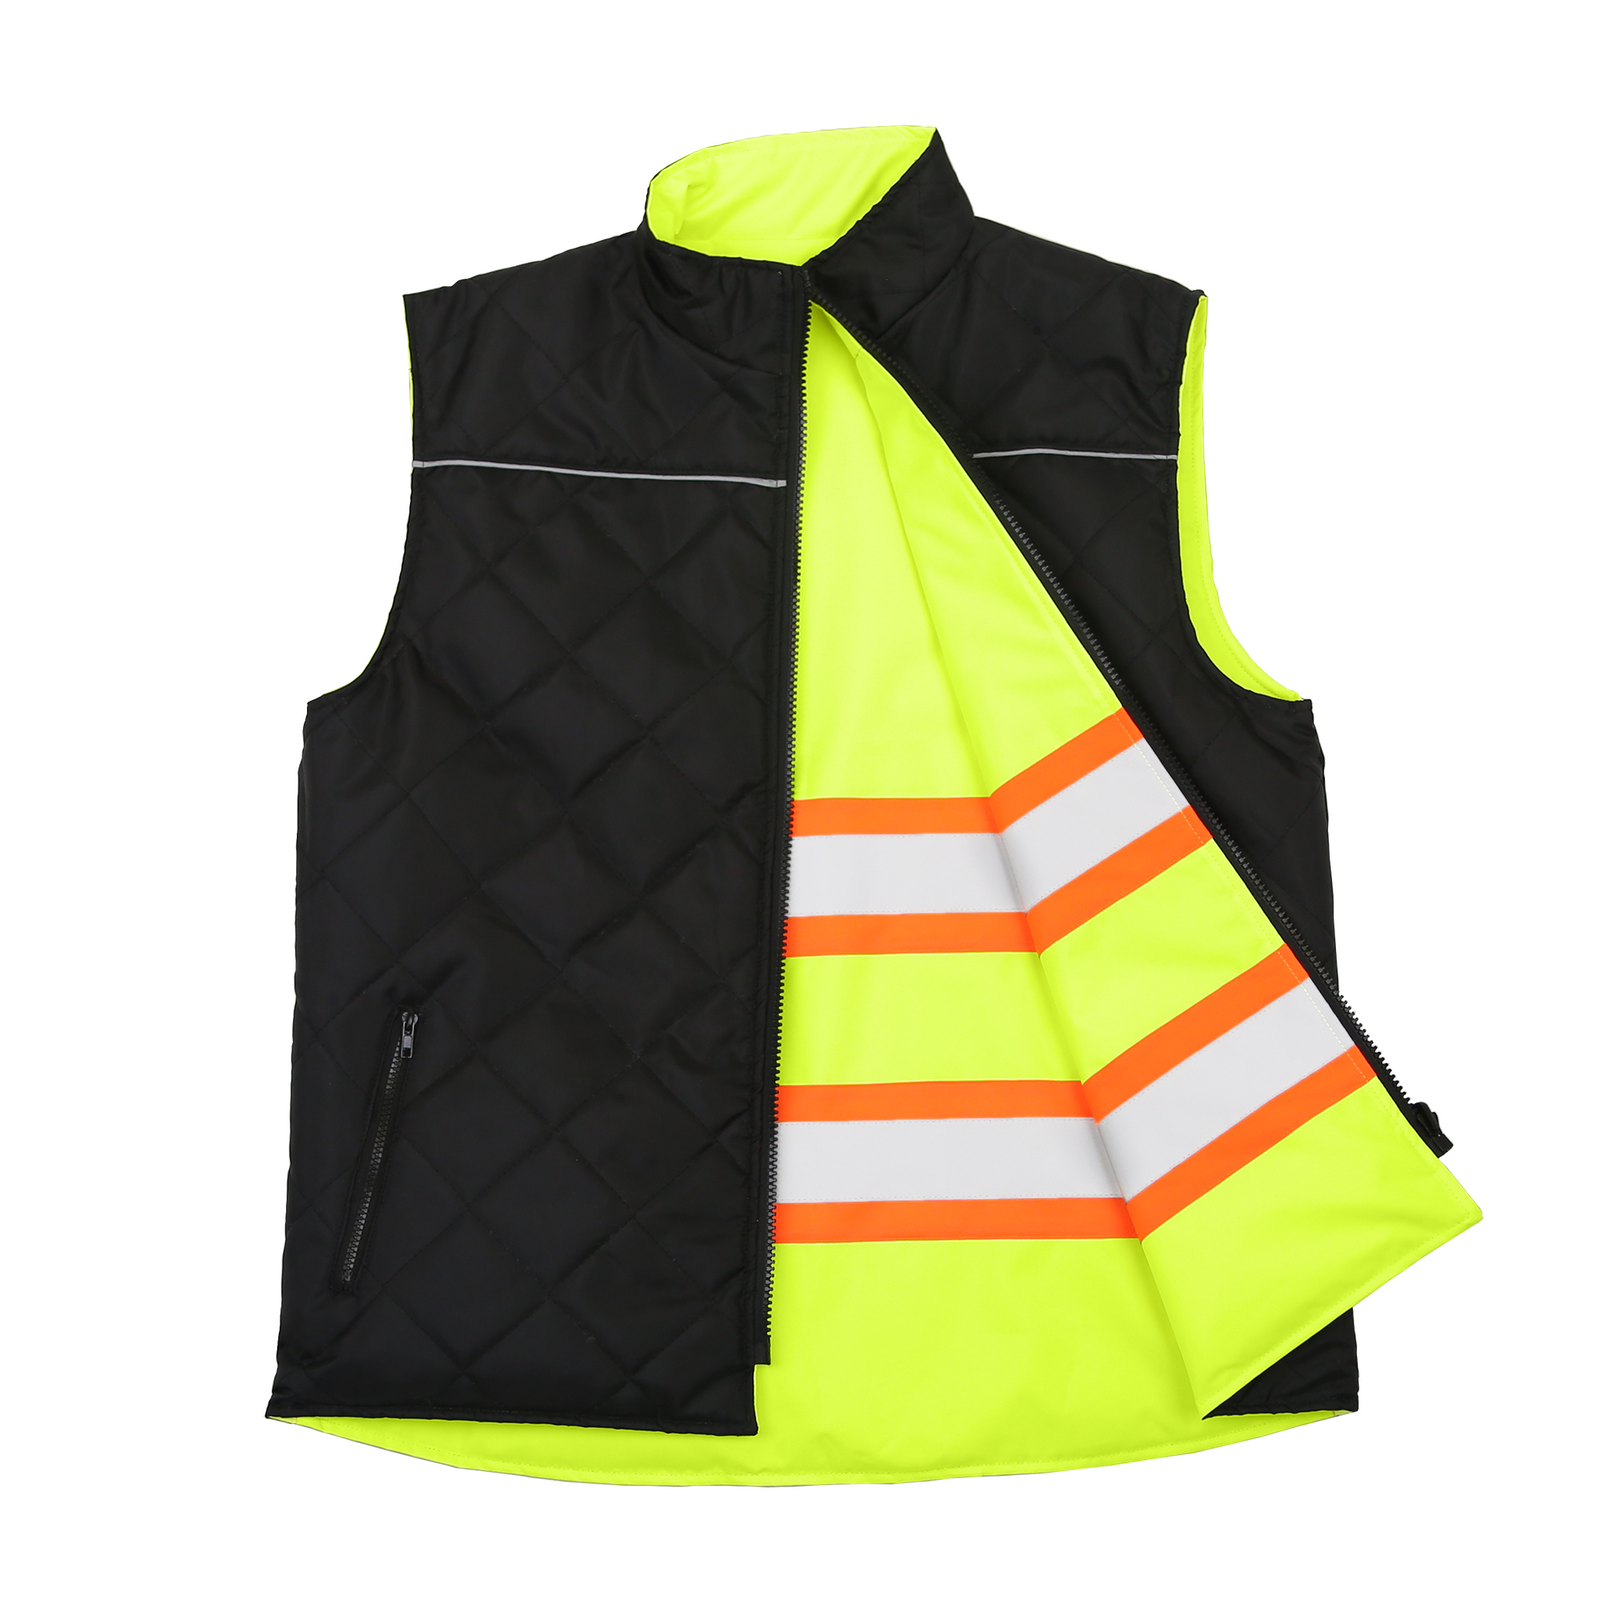 Front view showing the high visibility side and the black side of the JORESTECH reversible insulated safety vest with zipper